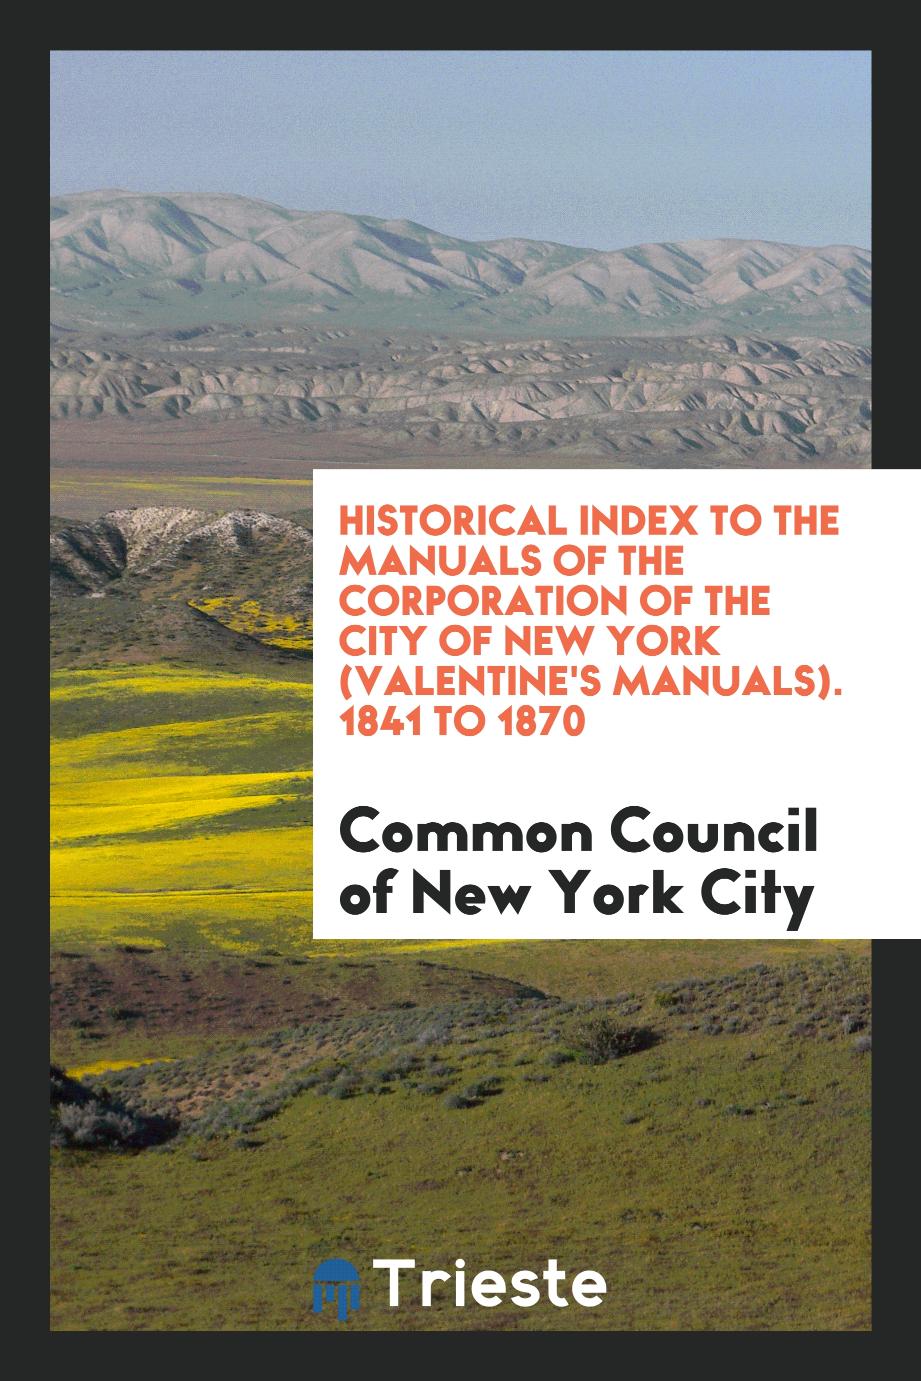 Historical Index to the Manuals of the Corporation of the City of New York (Valentine's Manuals). 1841 to 1870